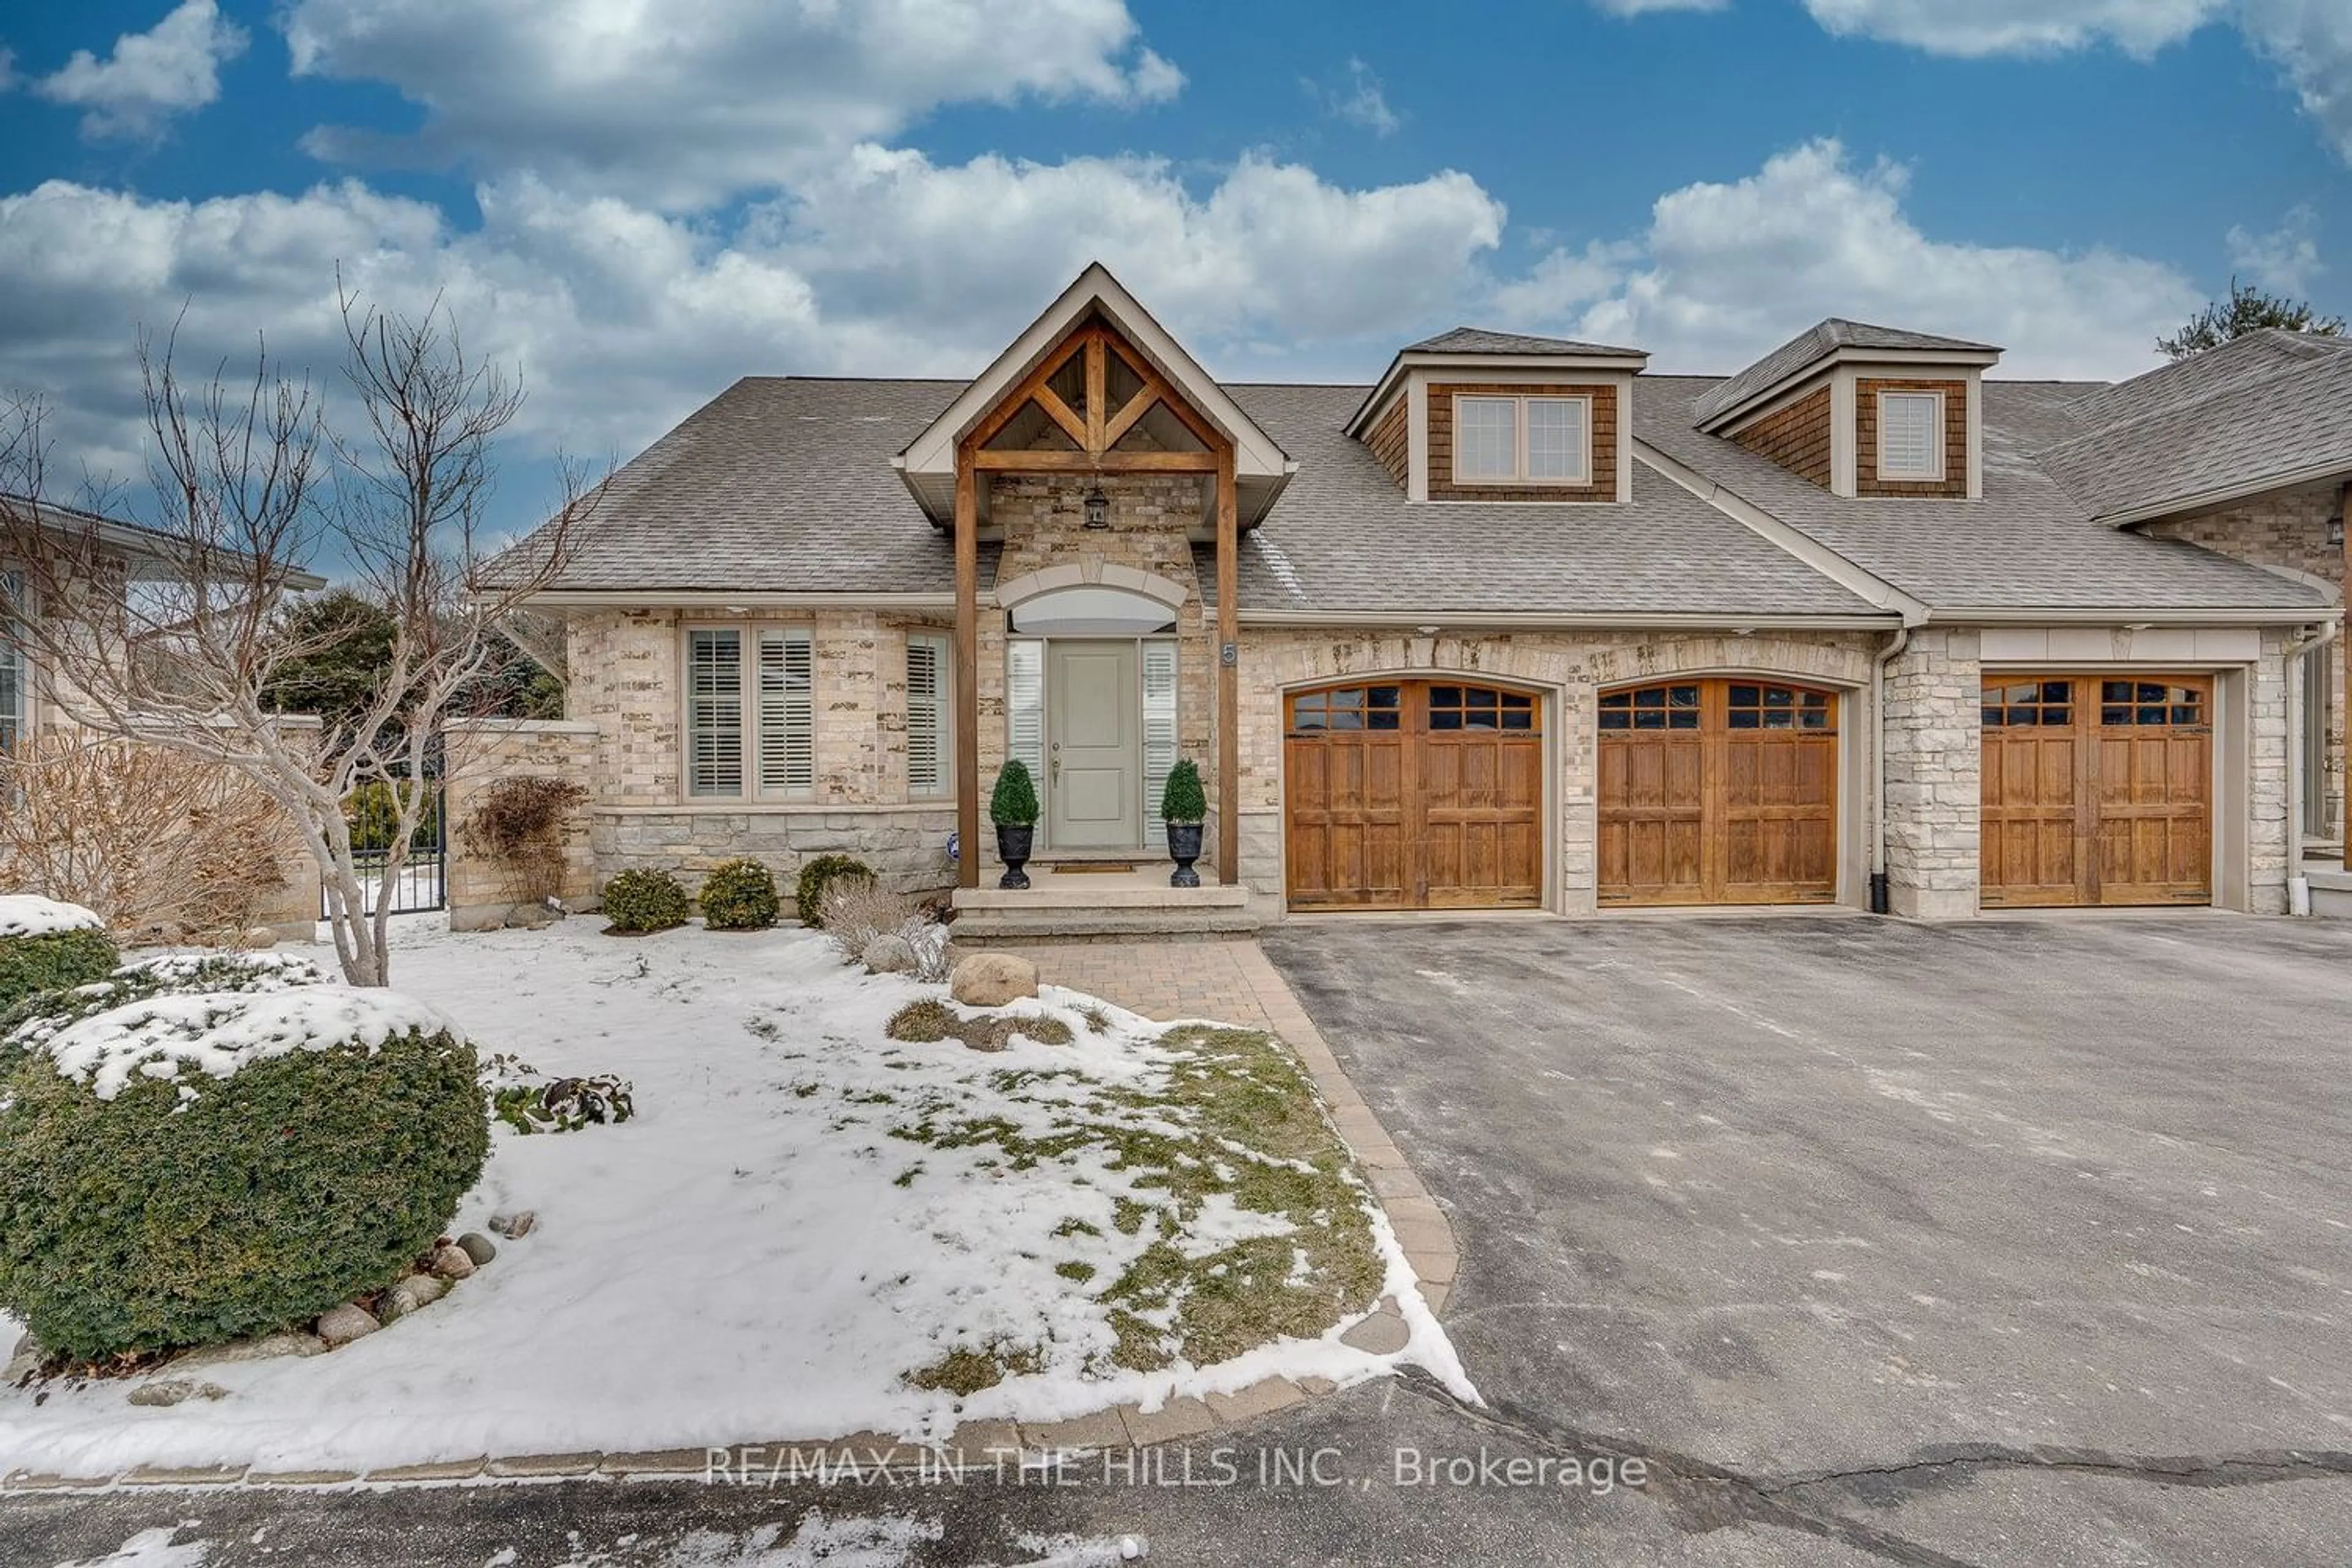 Home with brick exterior material for 14 Zimmerman Dr #5, Caledon Ontario L7E 4C2